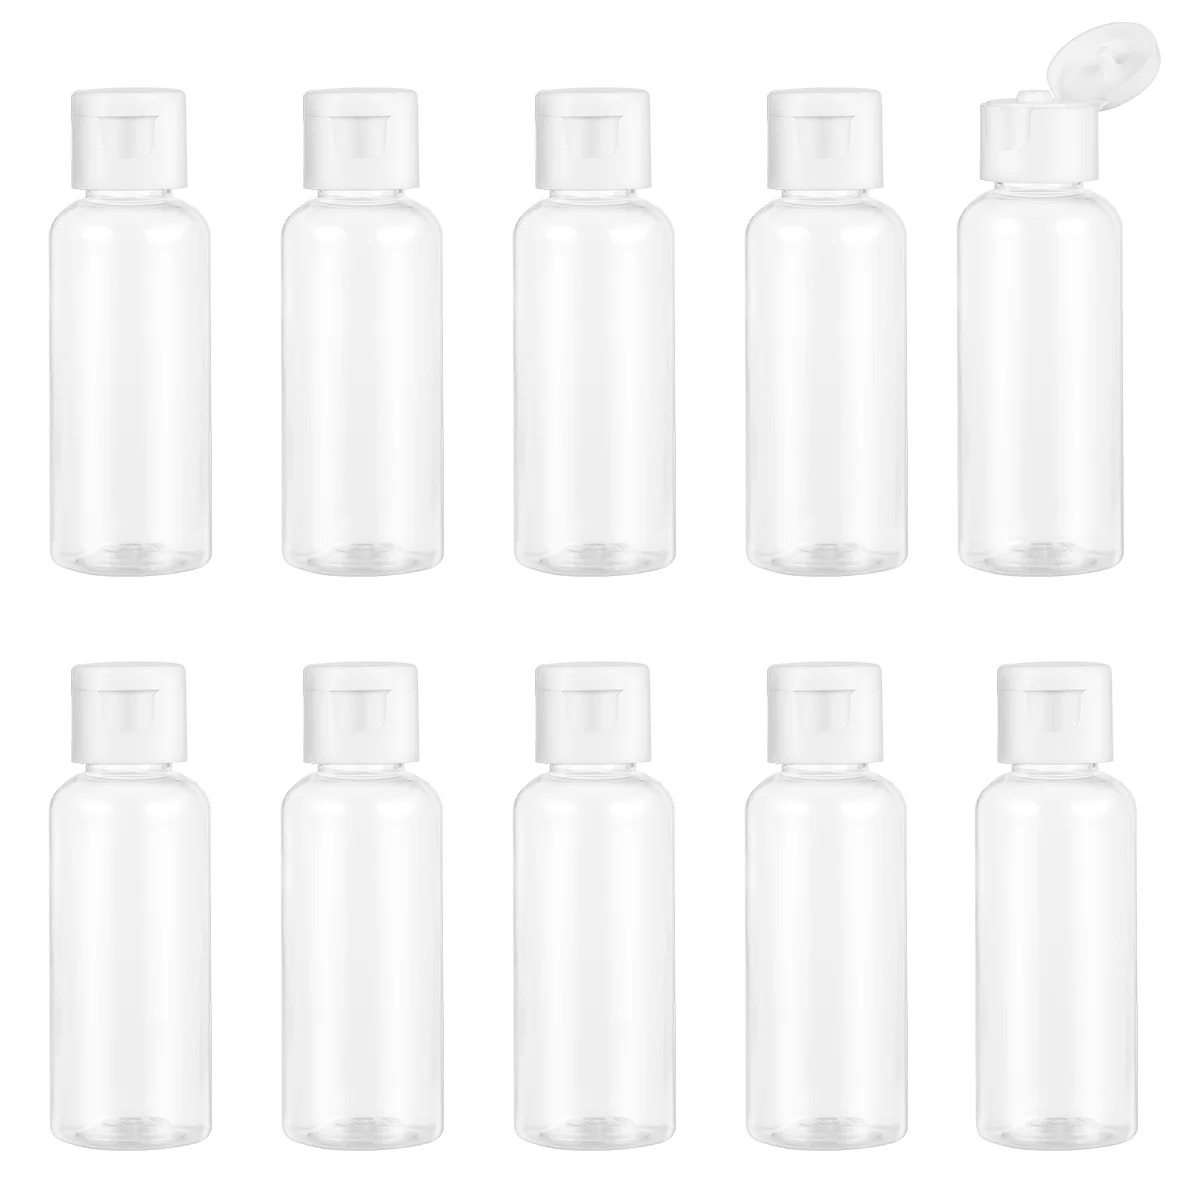 

Plastic Empty Bottles Refillable Lotion Bottle Liquid Cosmetics Containers Shampoo Cream For Travel